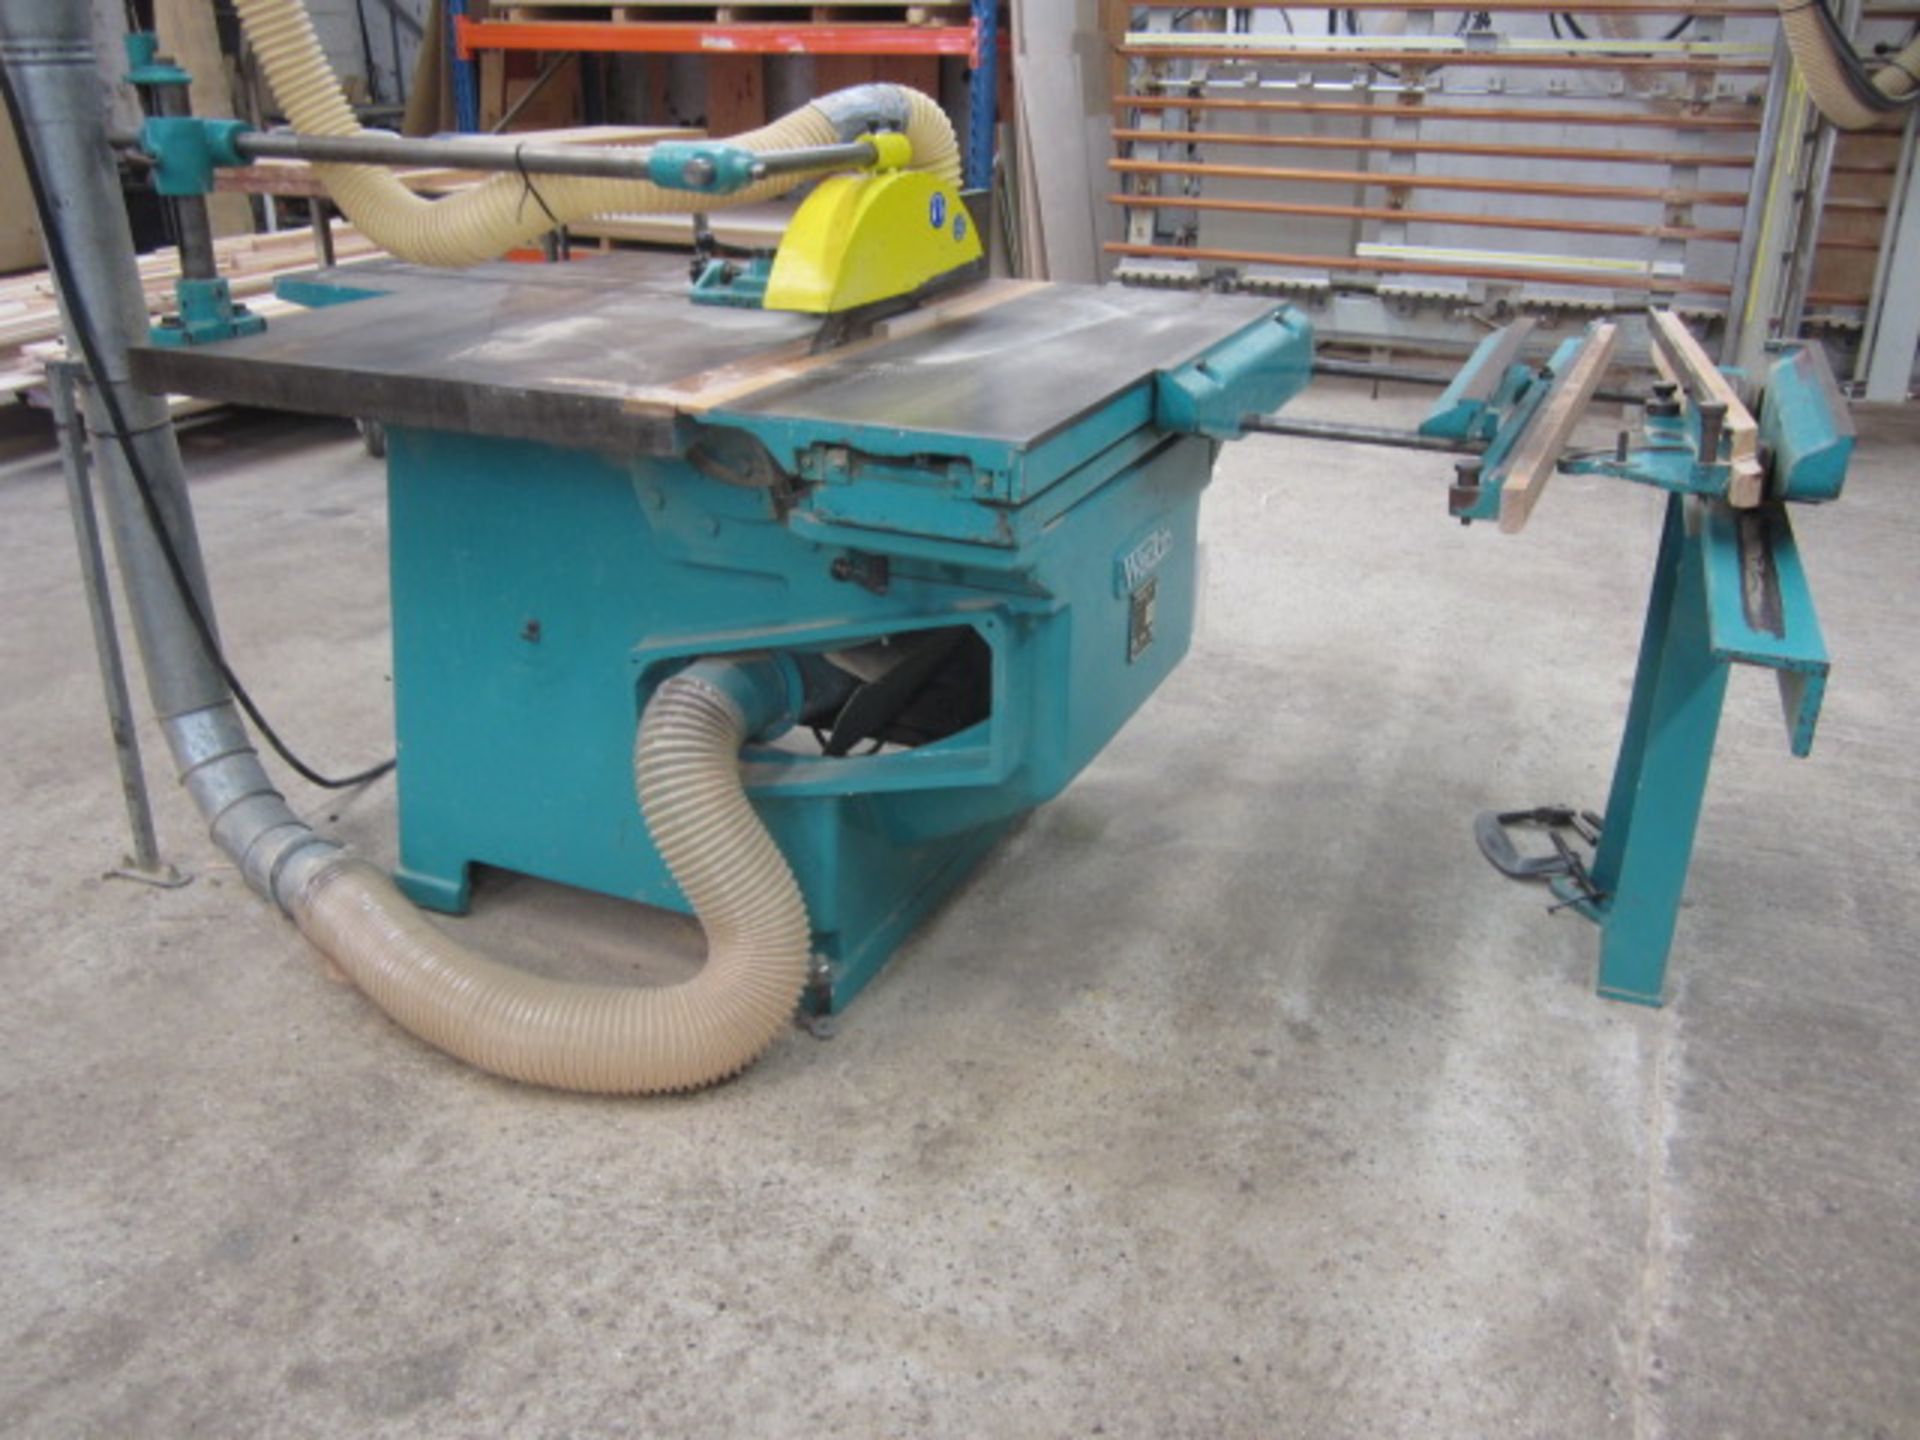 Wadkin split table 12" dimension circular saw, No PP741, ref no 78763 with table extension, 45° - Image 5 of 6